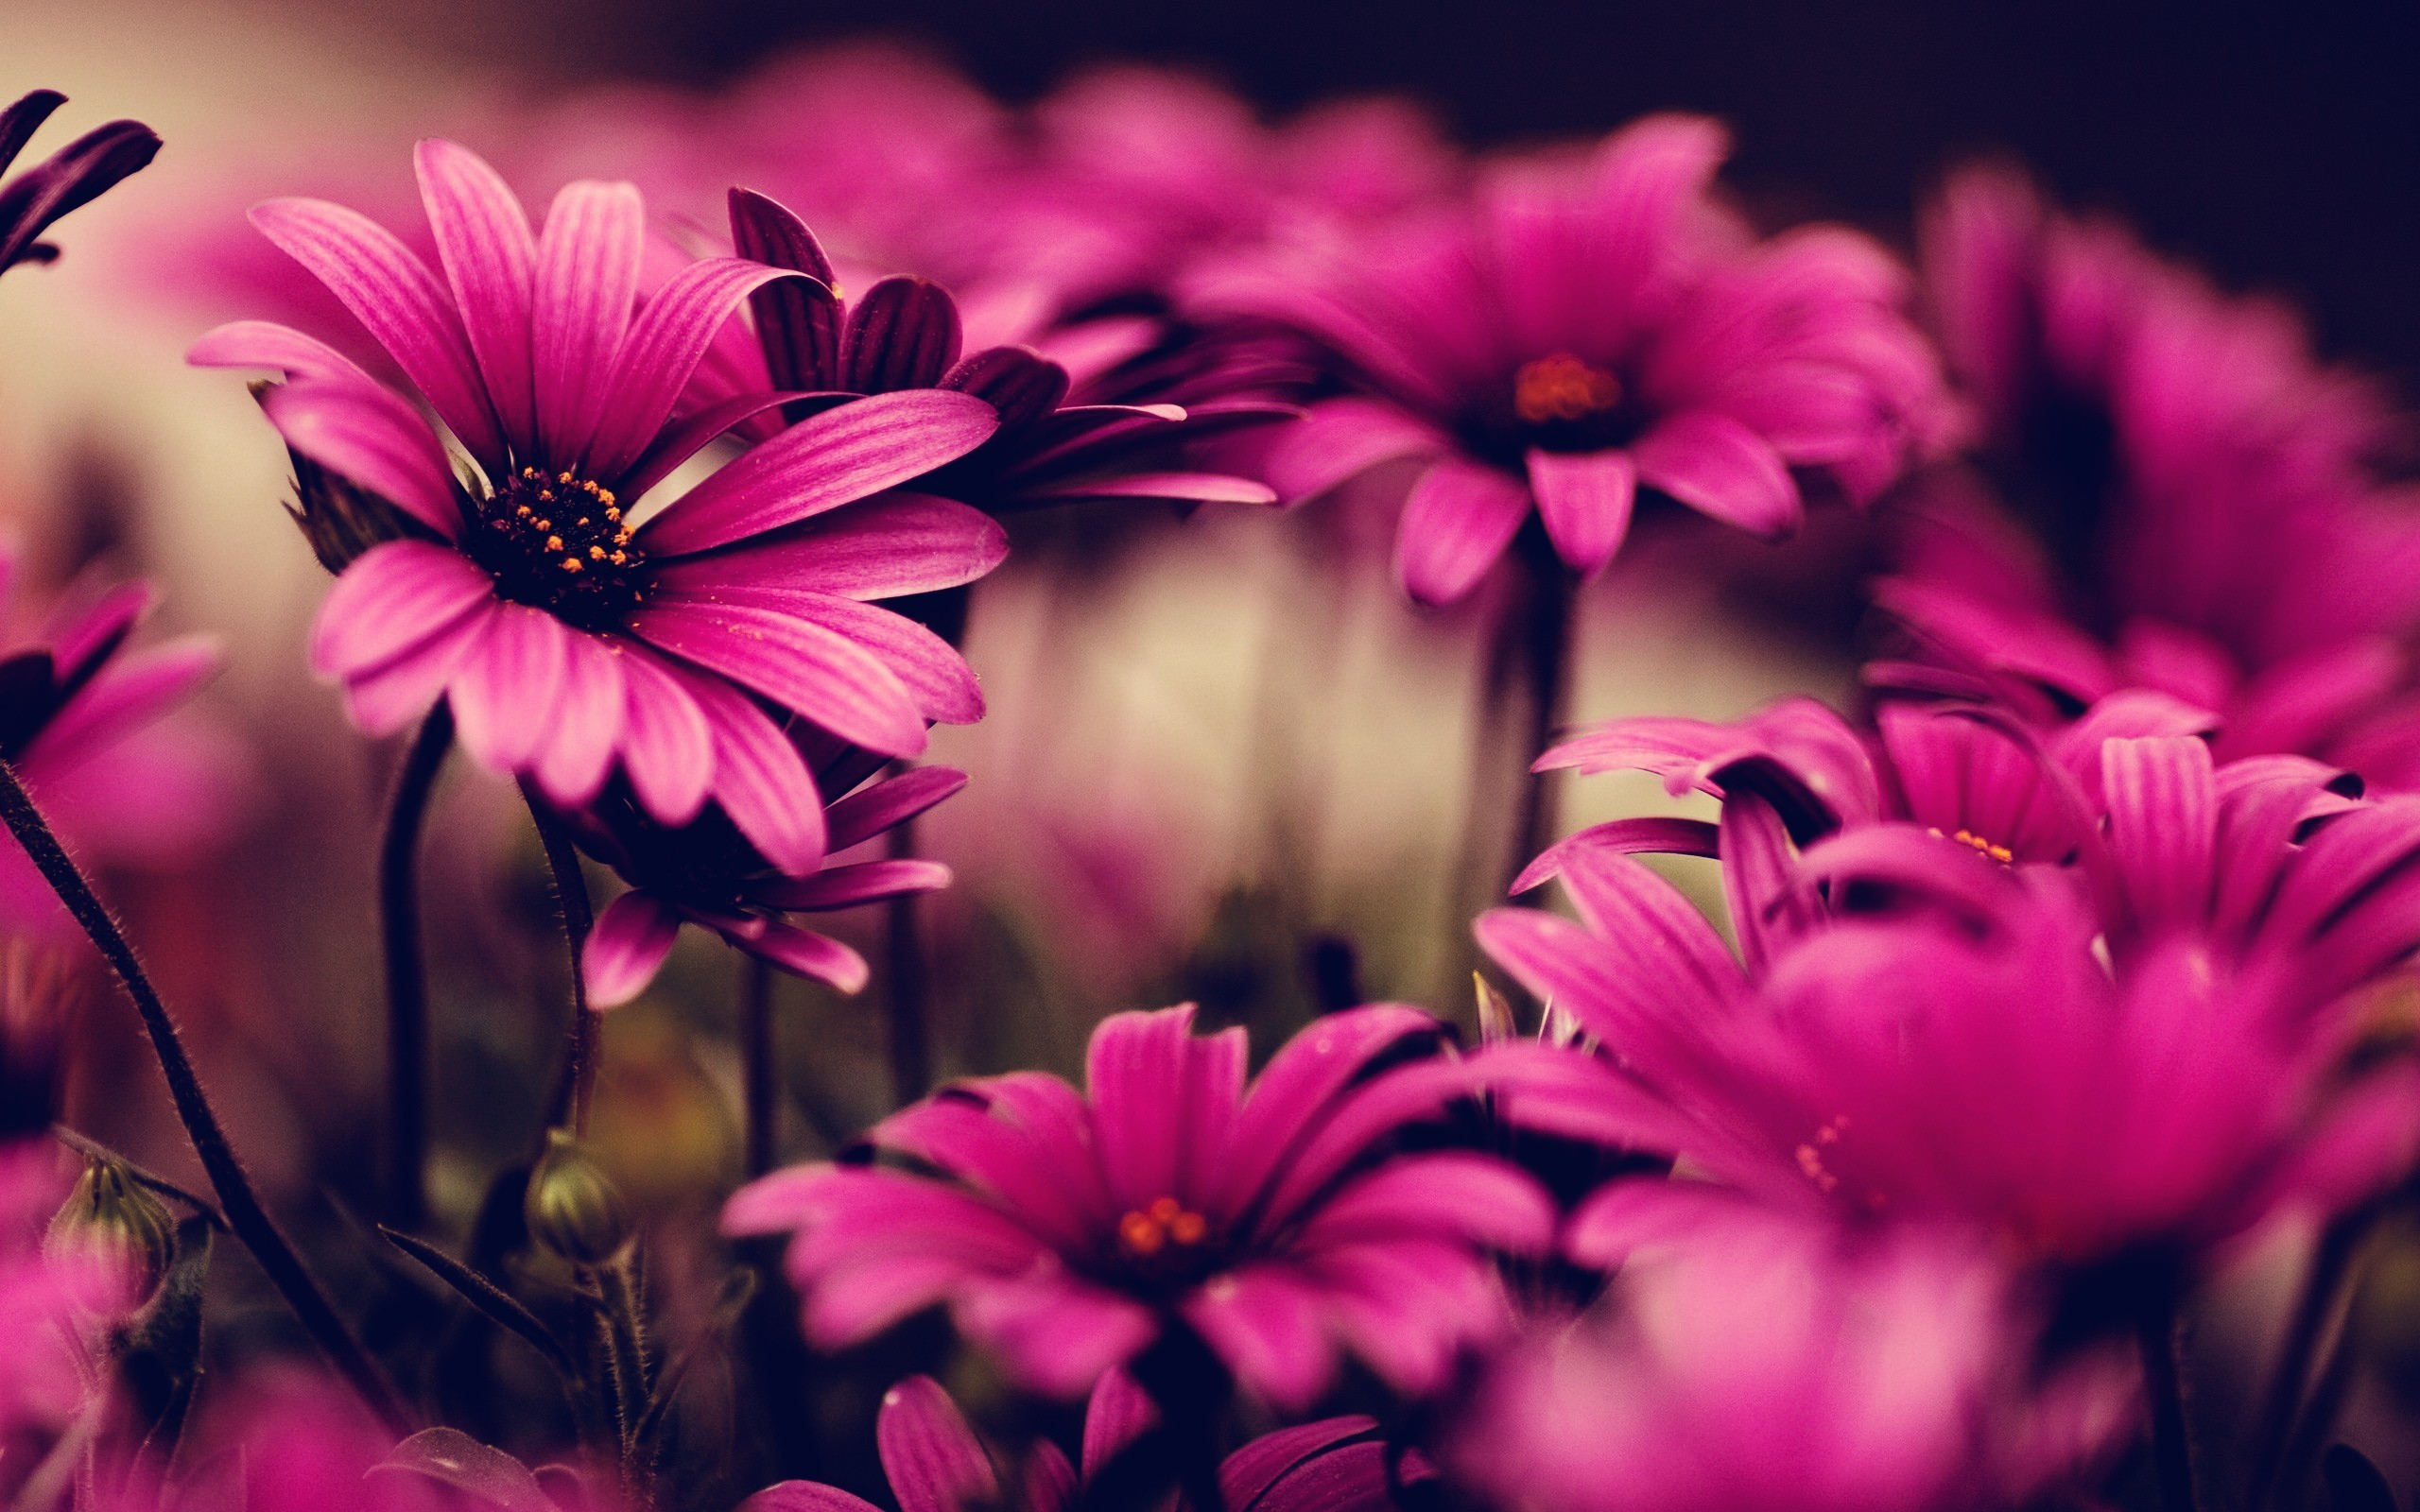 2560x1600  40 BEAUTIFUL FLOWER WALLPAPERS FREE TO DOWNLOAD | Pinterest | Flower  backgrounds, Flower and